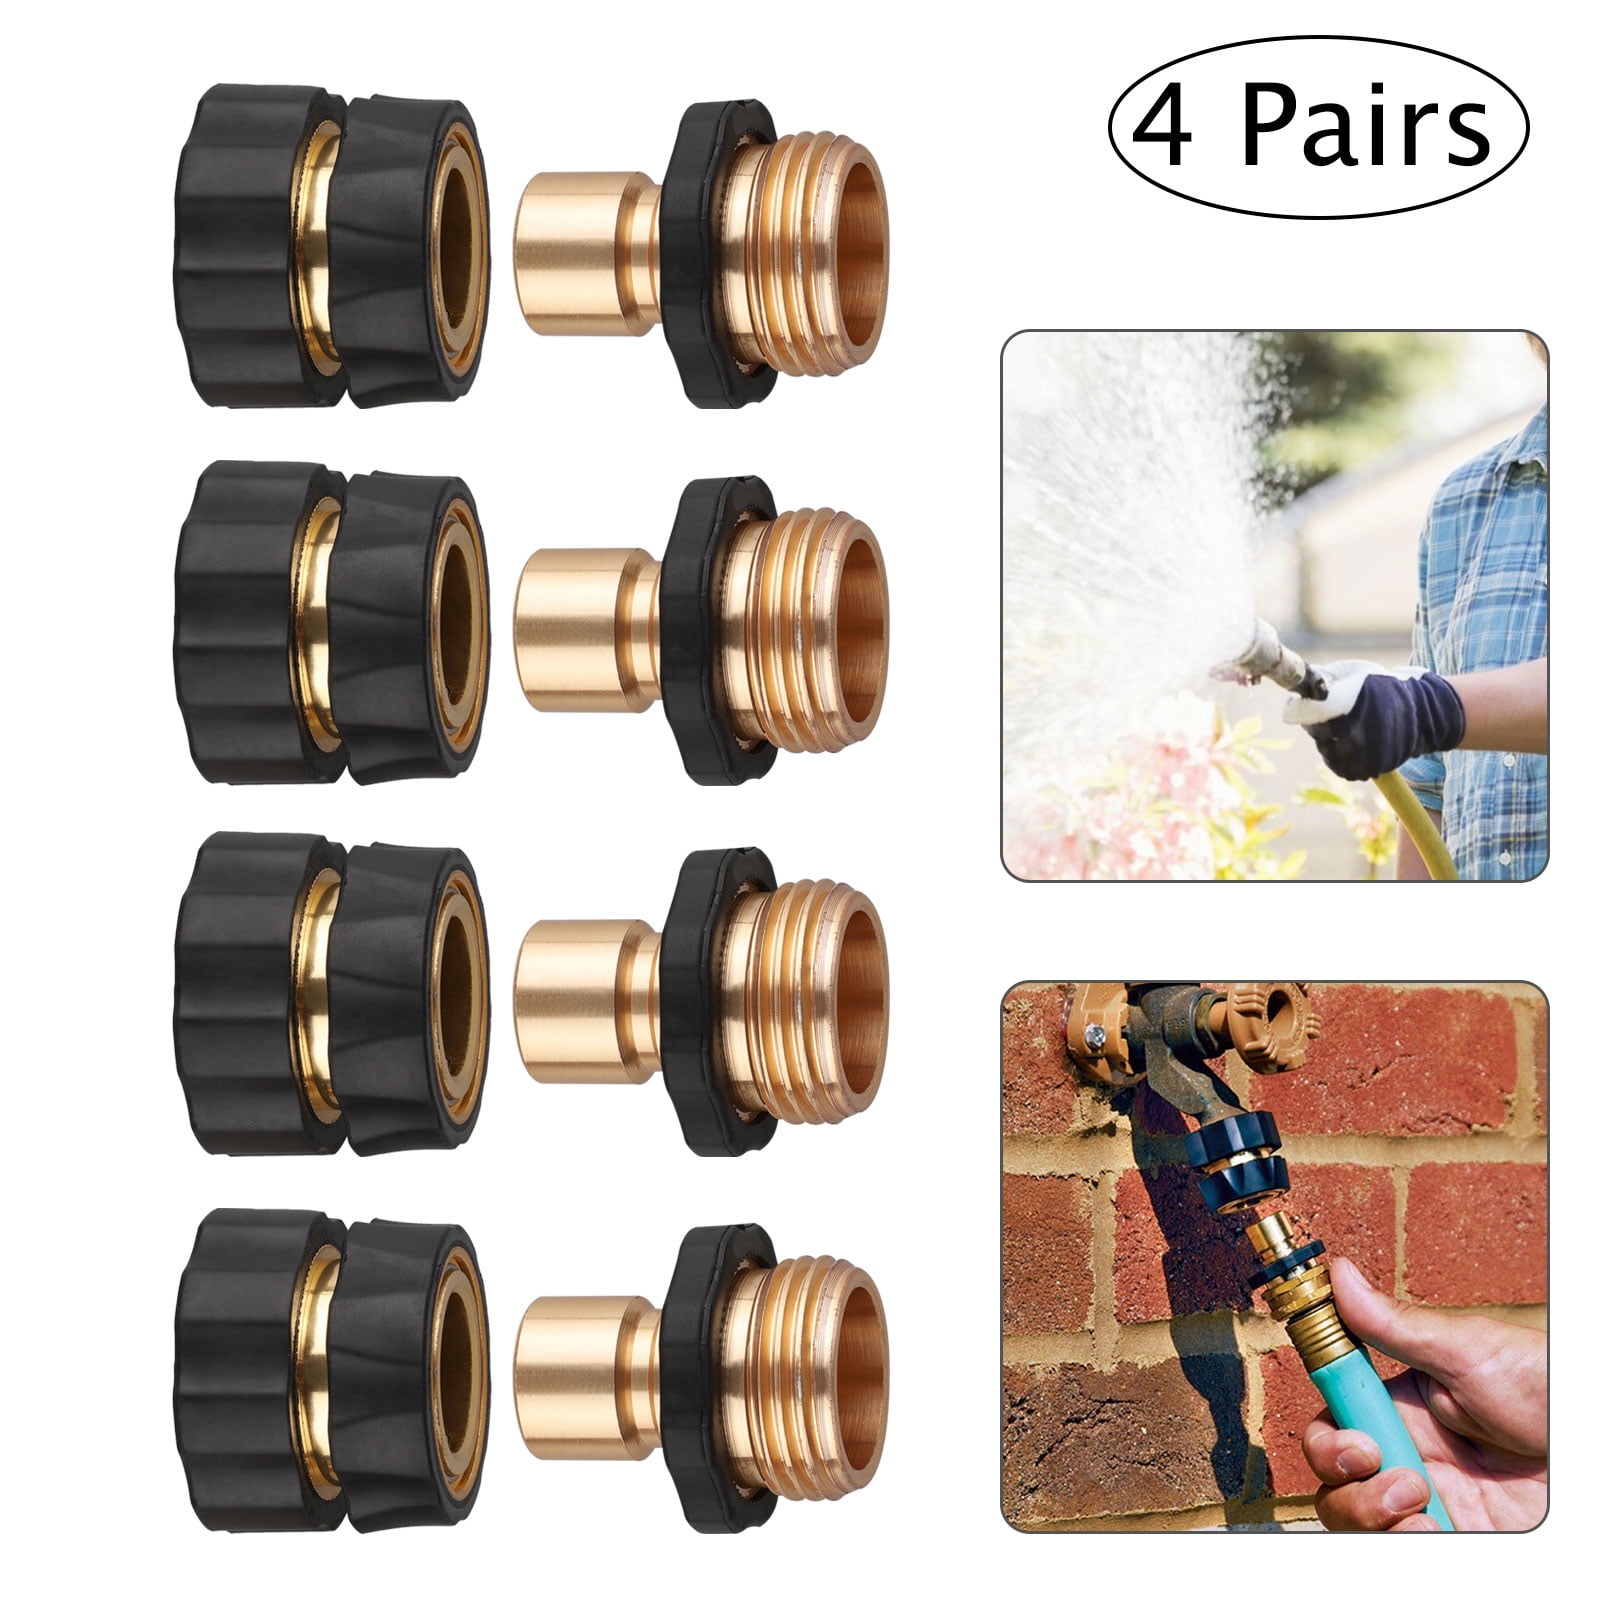 4 Pairs Garden Hose Quick Connect Set Tap Adapter Brass Hose Connector Universal 